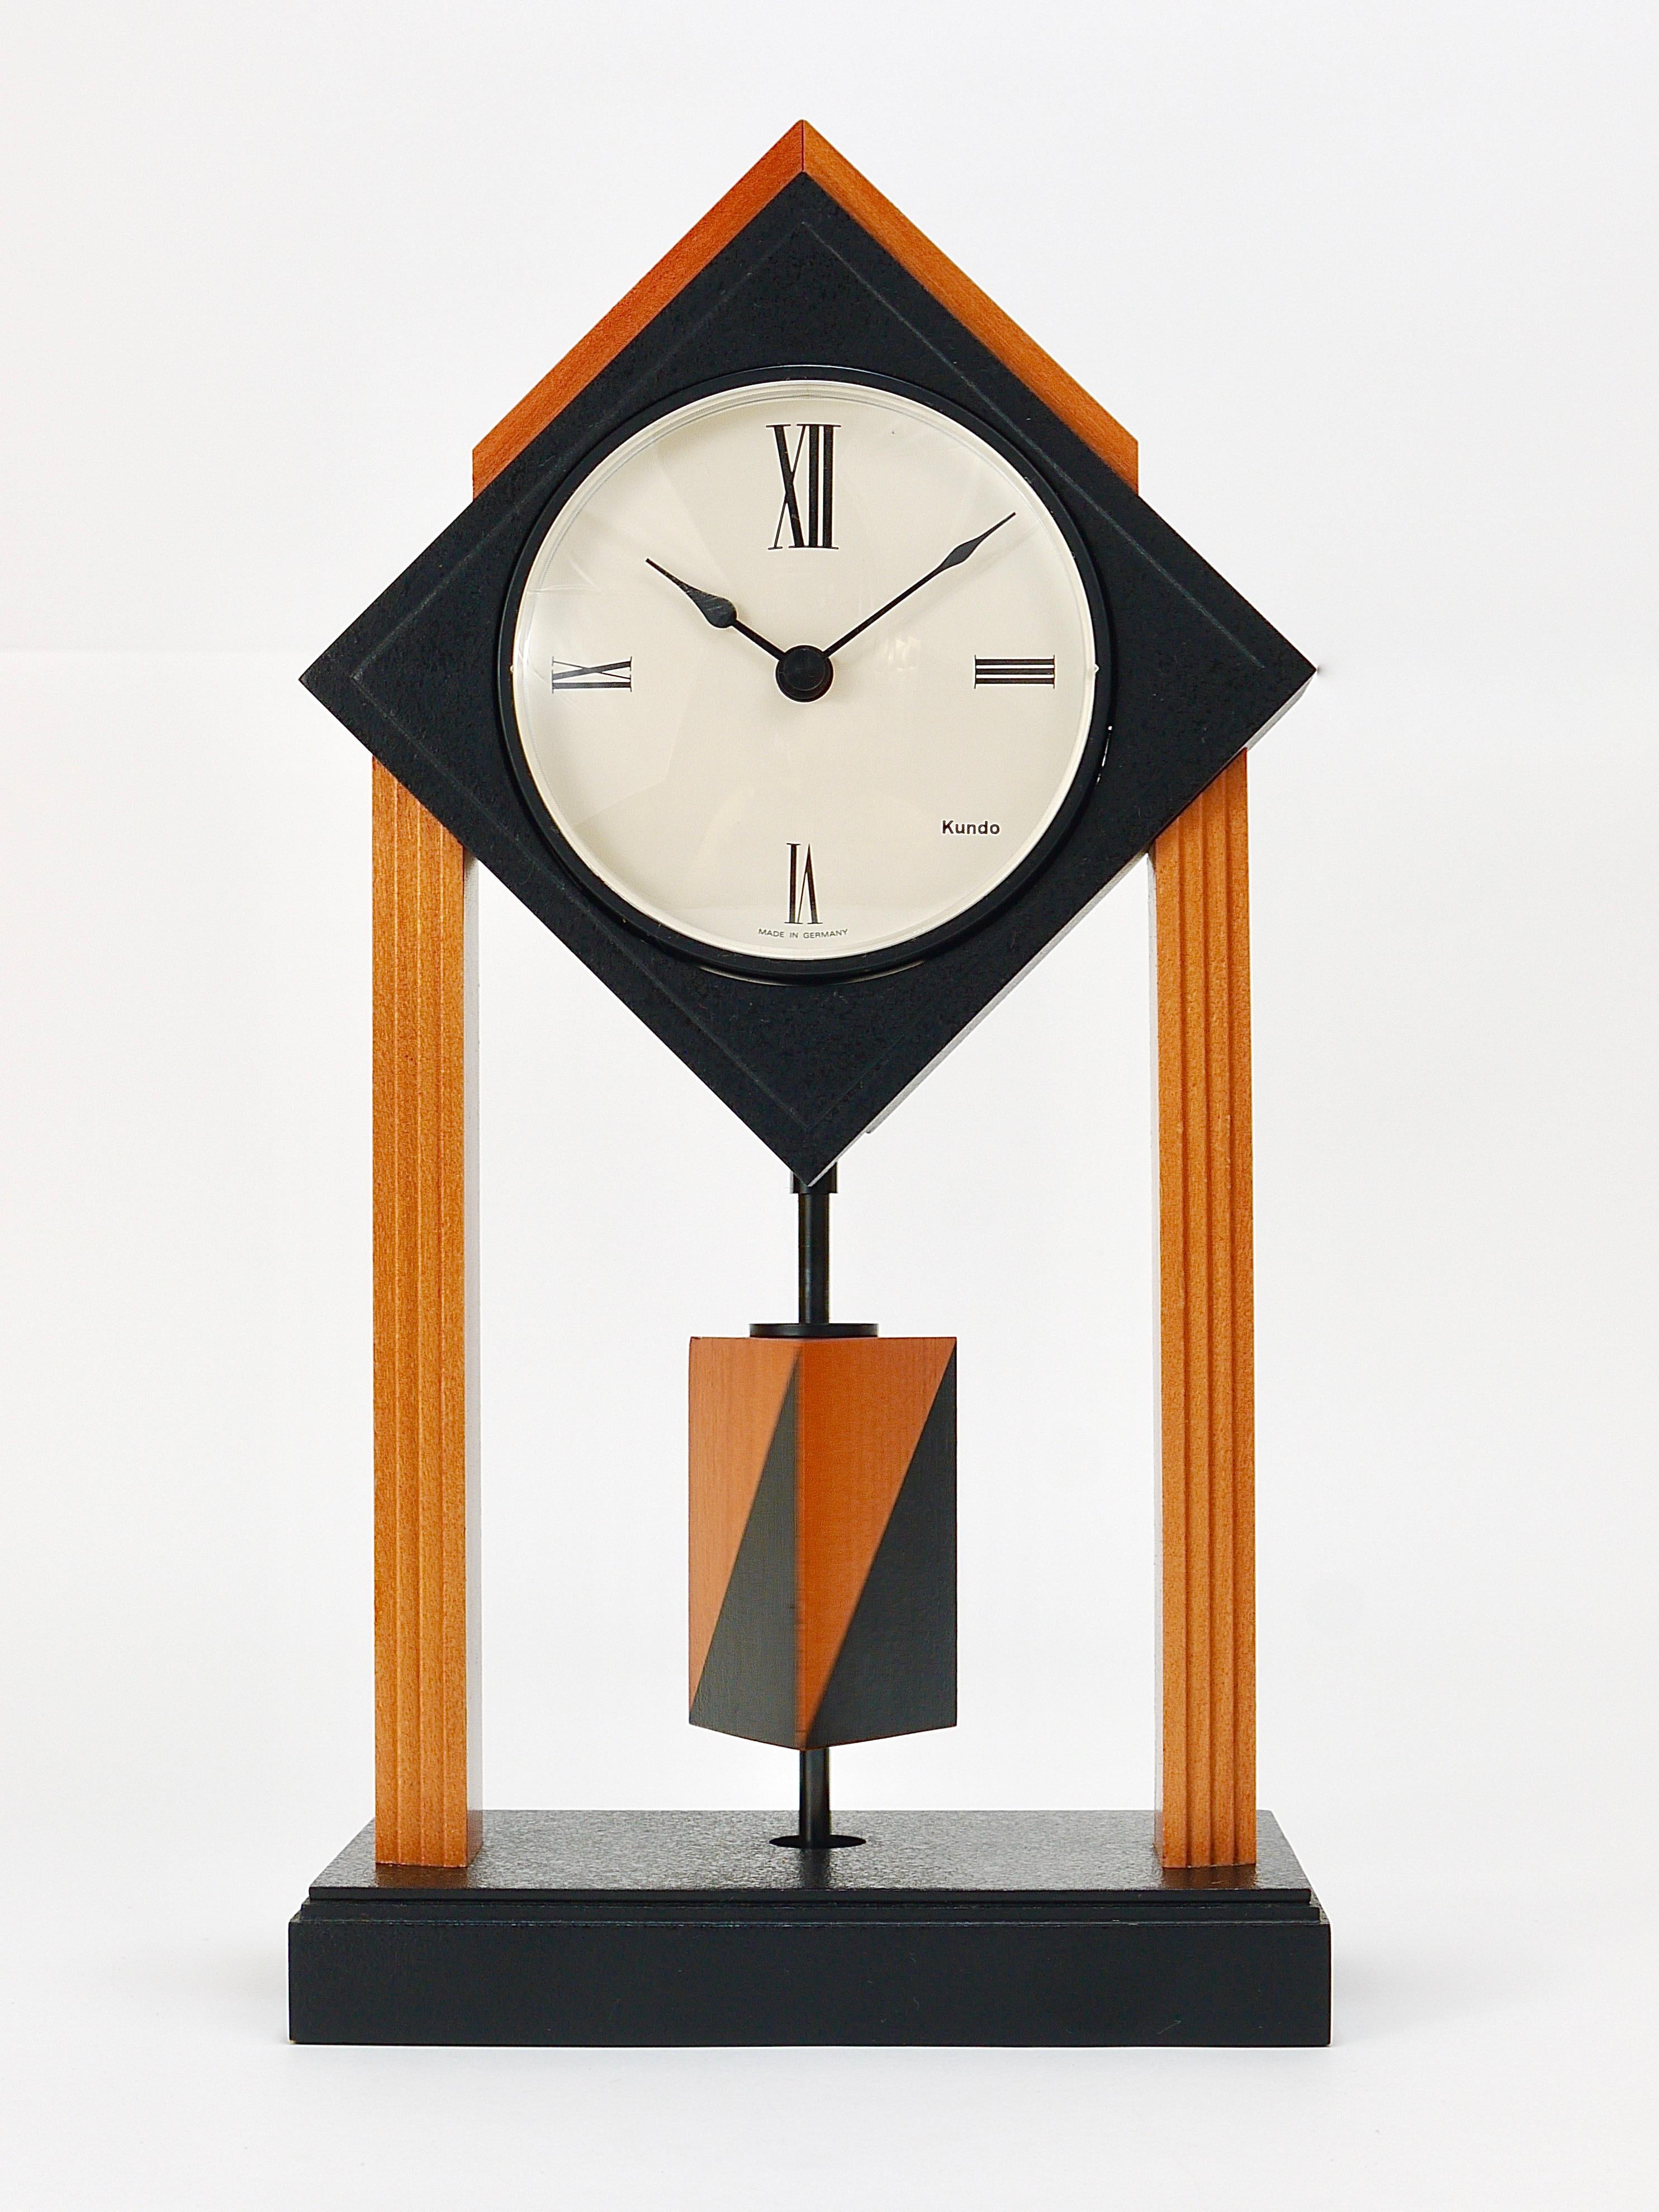 A wonderful post modern Memphis style desk or table pillar clock with a rotating triangular pendulum. Executed by Kundo Germany in the 1980s. 
Made of natural and black lacquered wood with a beautiful clocks face and nice black hands. Powered by a